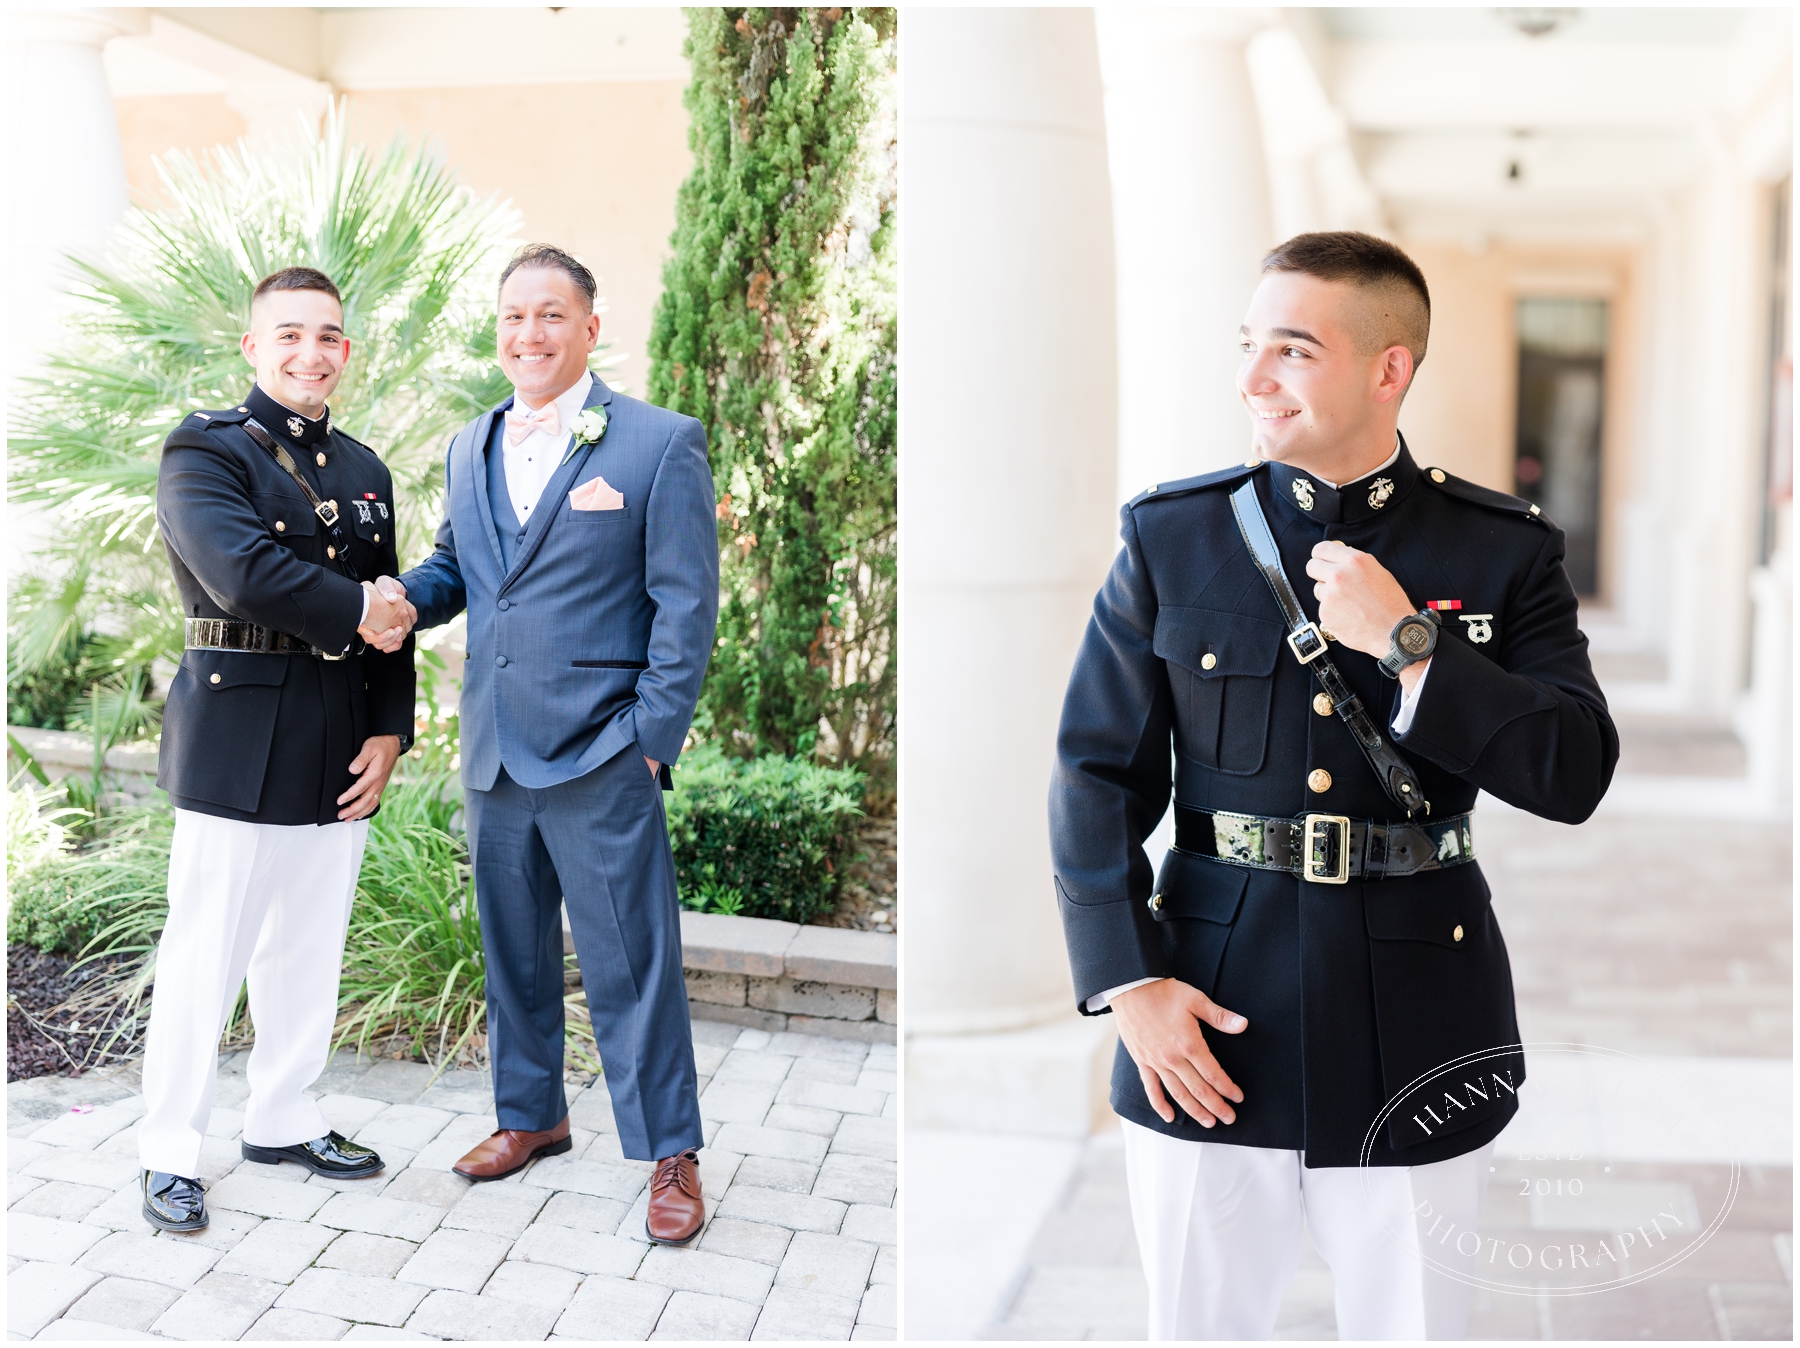 Grooms and father on wedding day